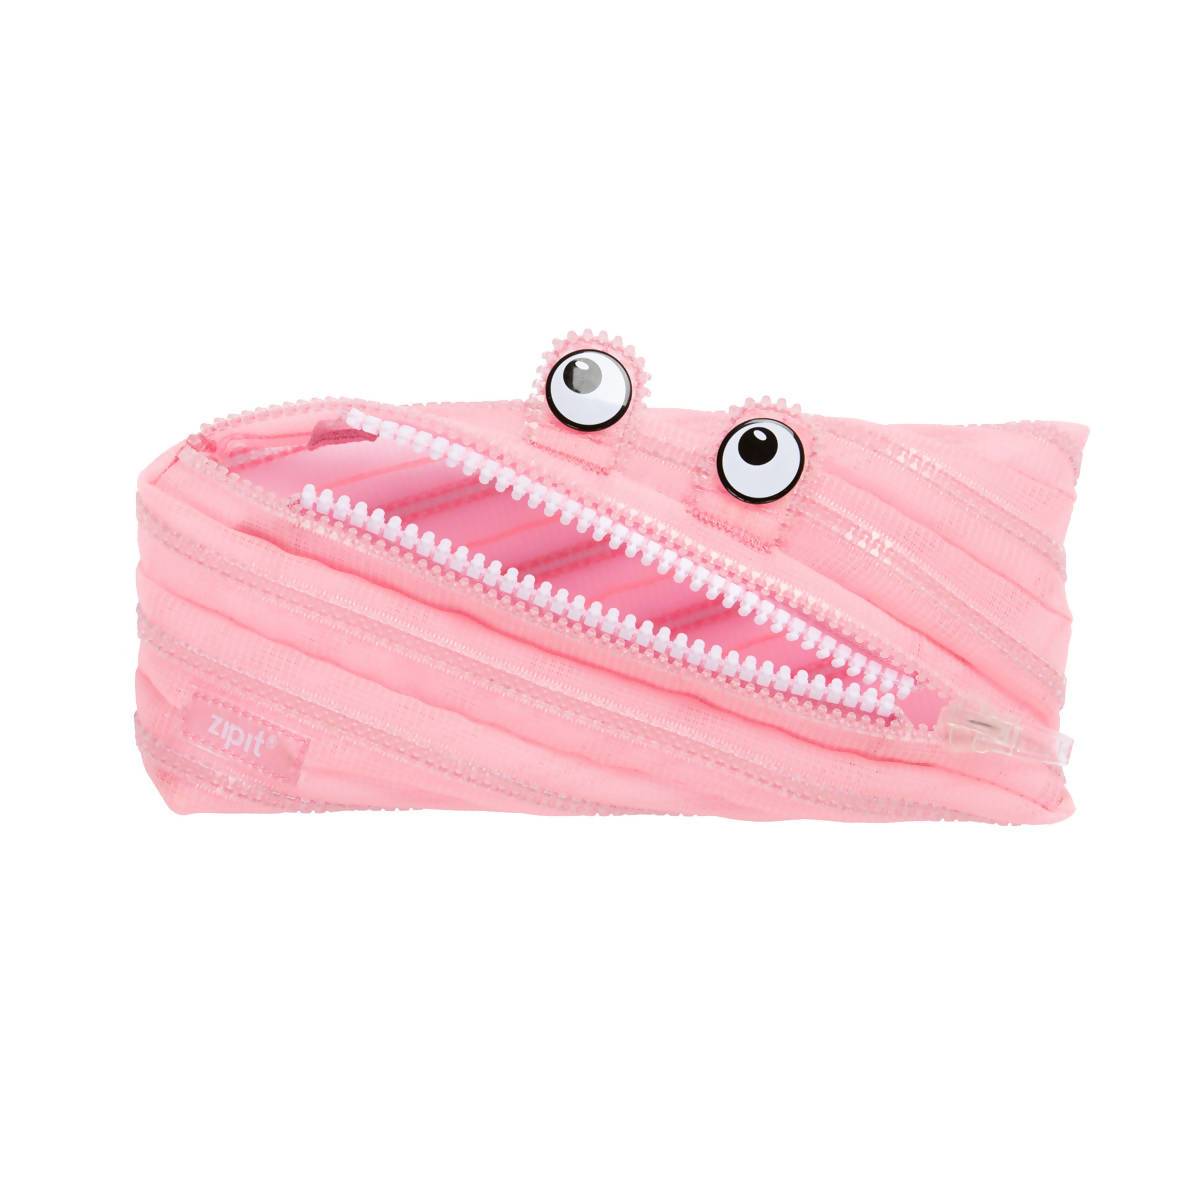 EASTHILL Grid Mesh Pen Pencil Case with Zipper Clear Makeup Color Pouch  Pink